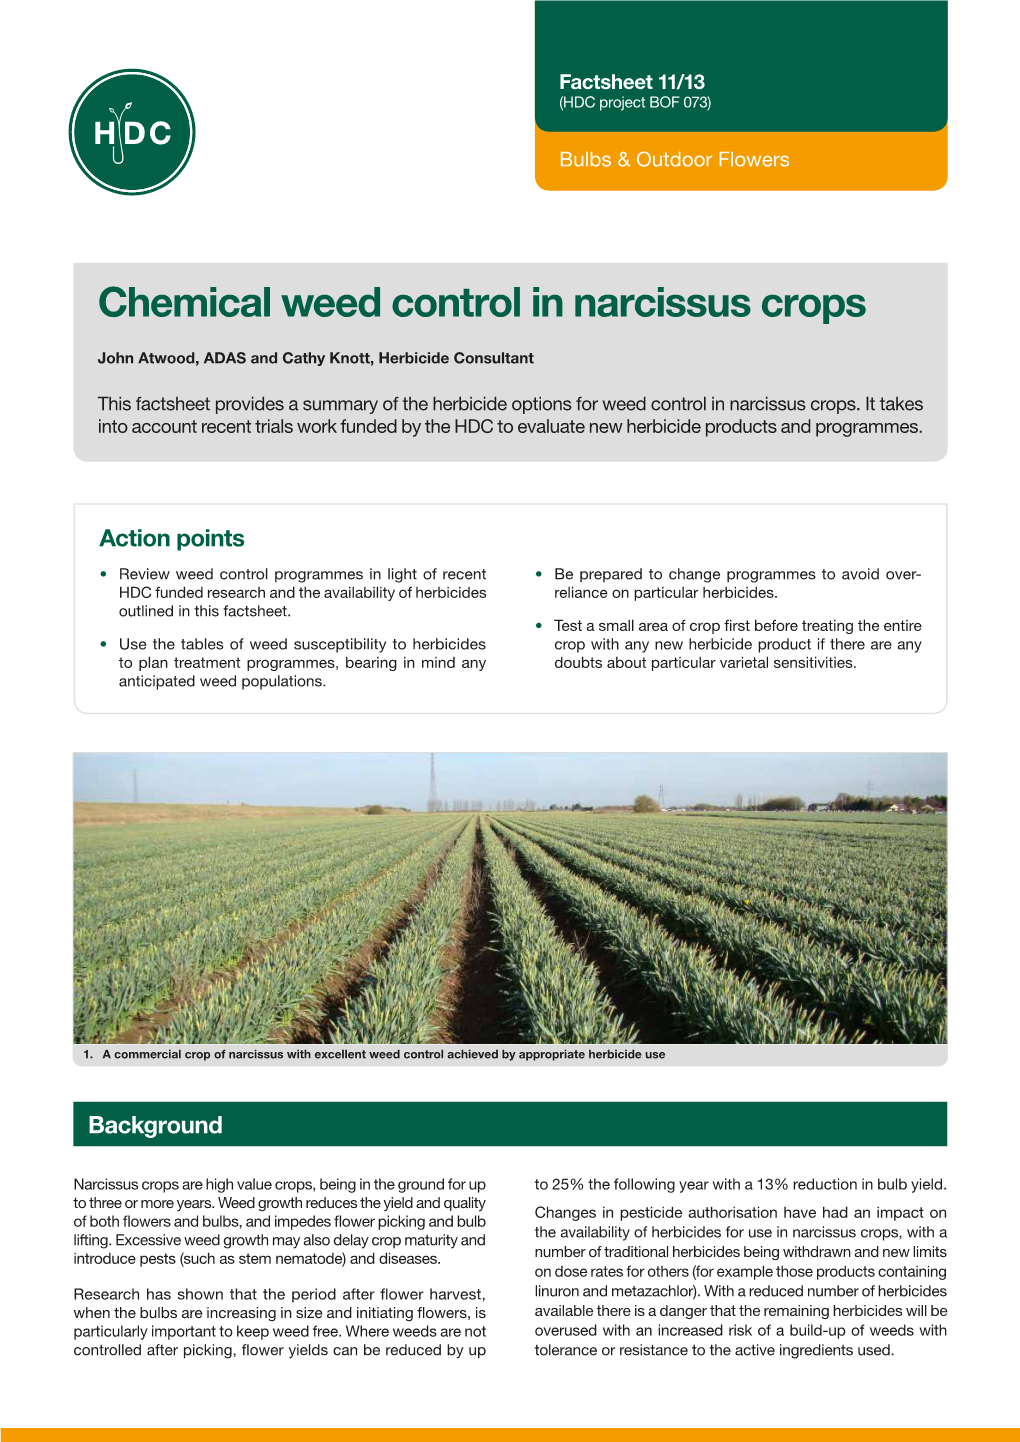 Chemical Weed Control in Narcissus Crops